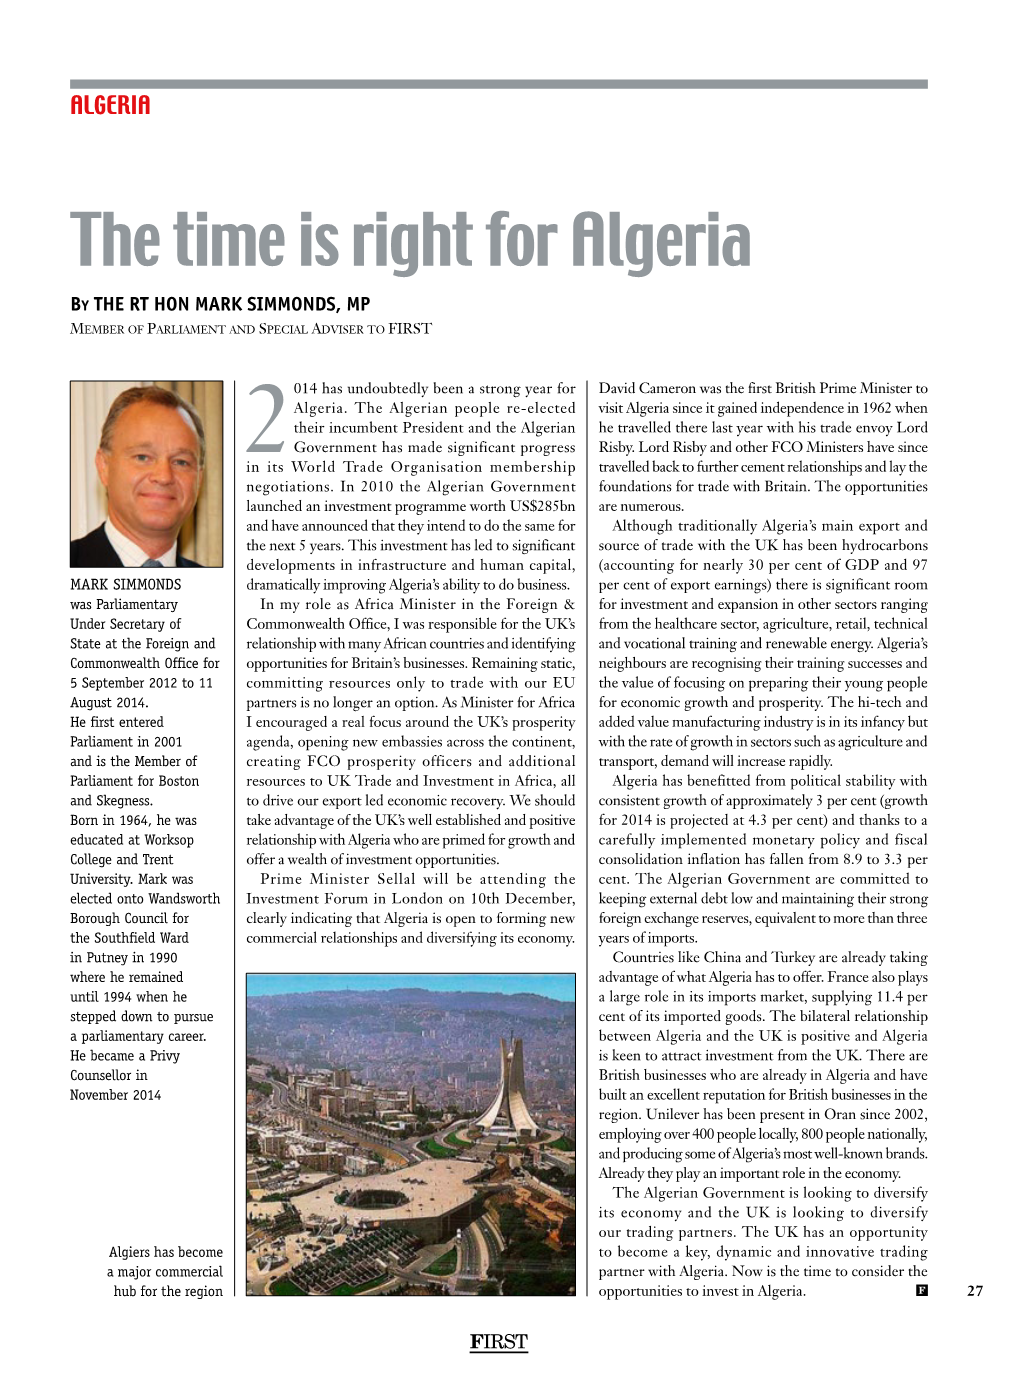 The Time Is Right for Algeria by the RT HON MARK SIMMONDS, MP Member of Parliament and Special Adviser to FIRST